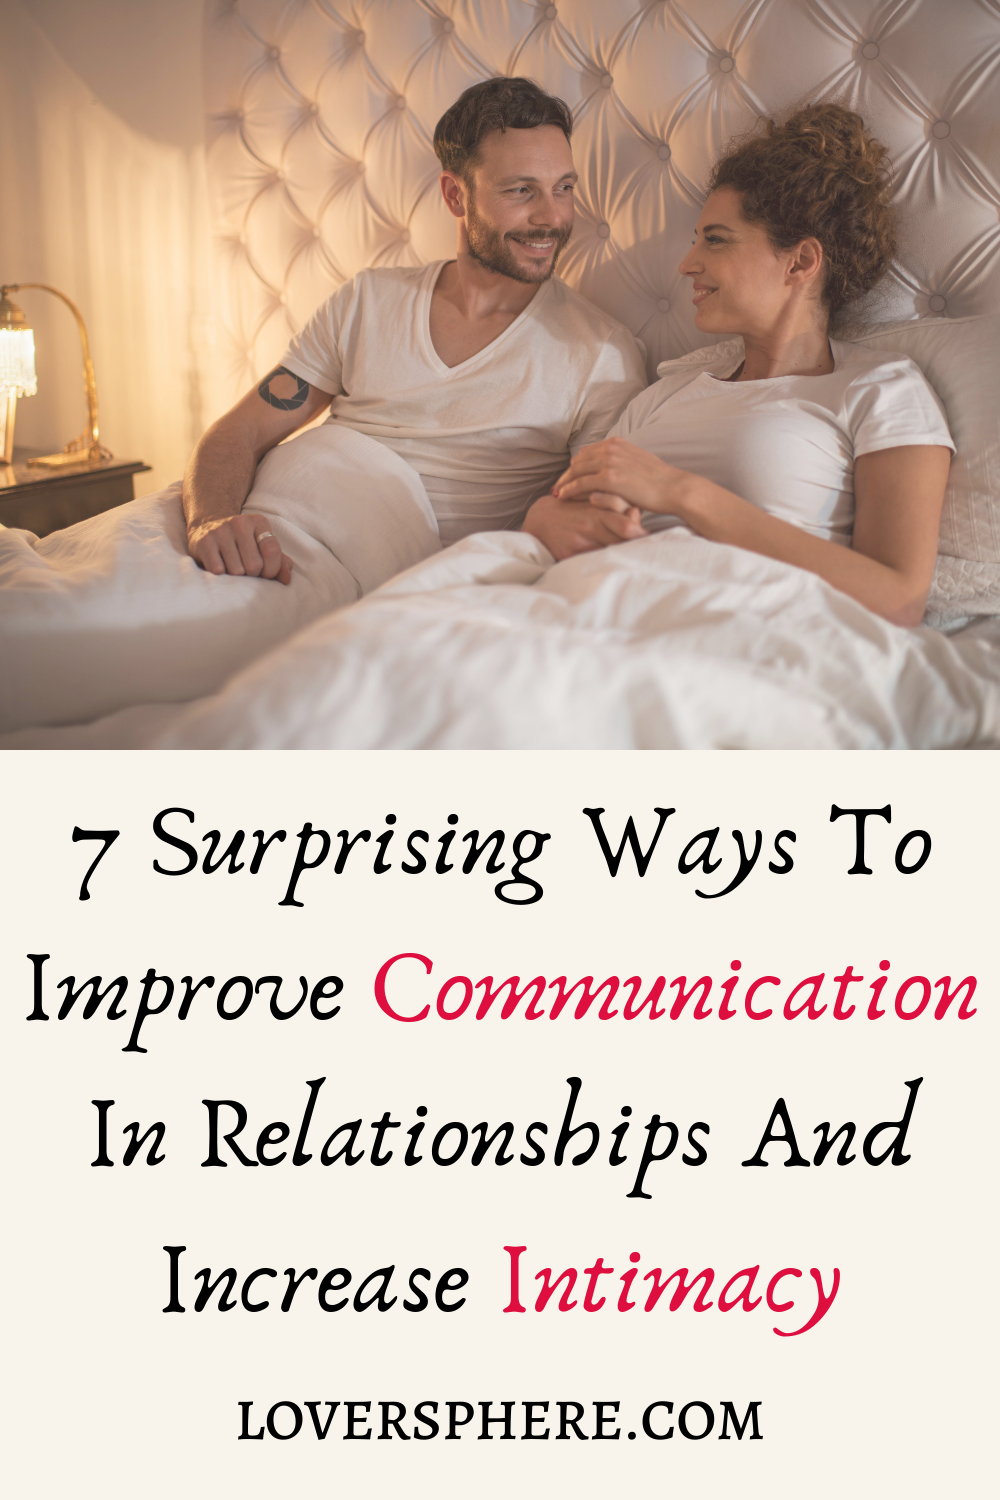 How To Improve Communication In A Relationships And Increase Intimacy